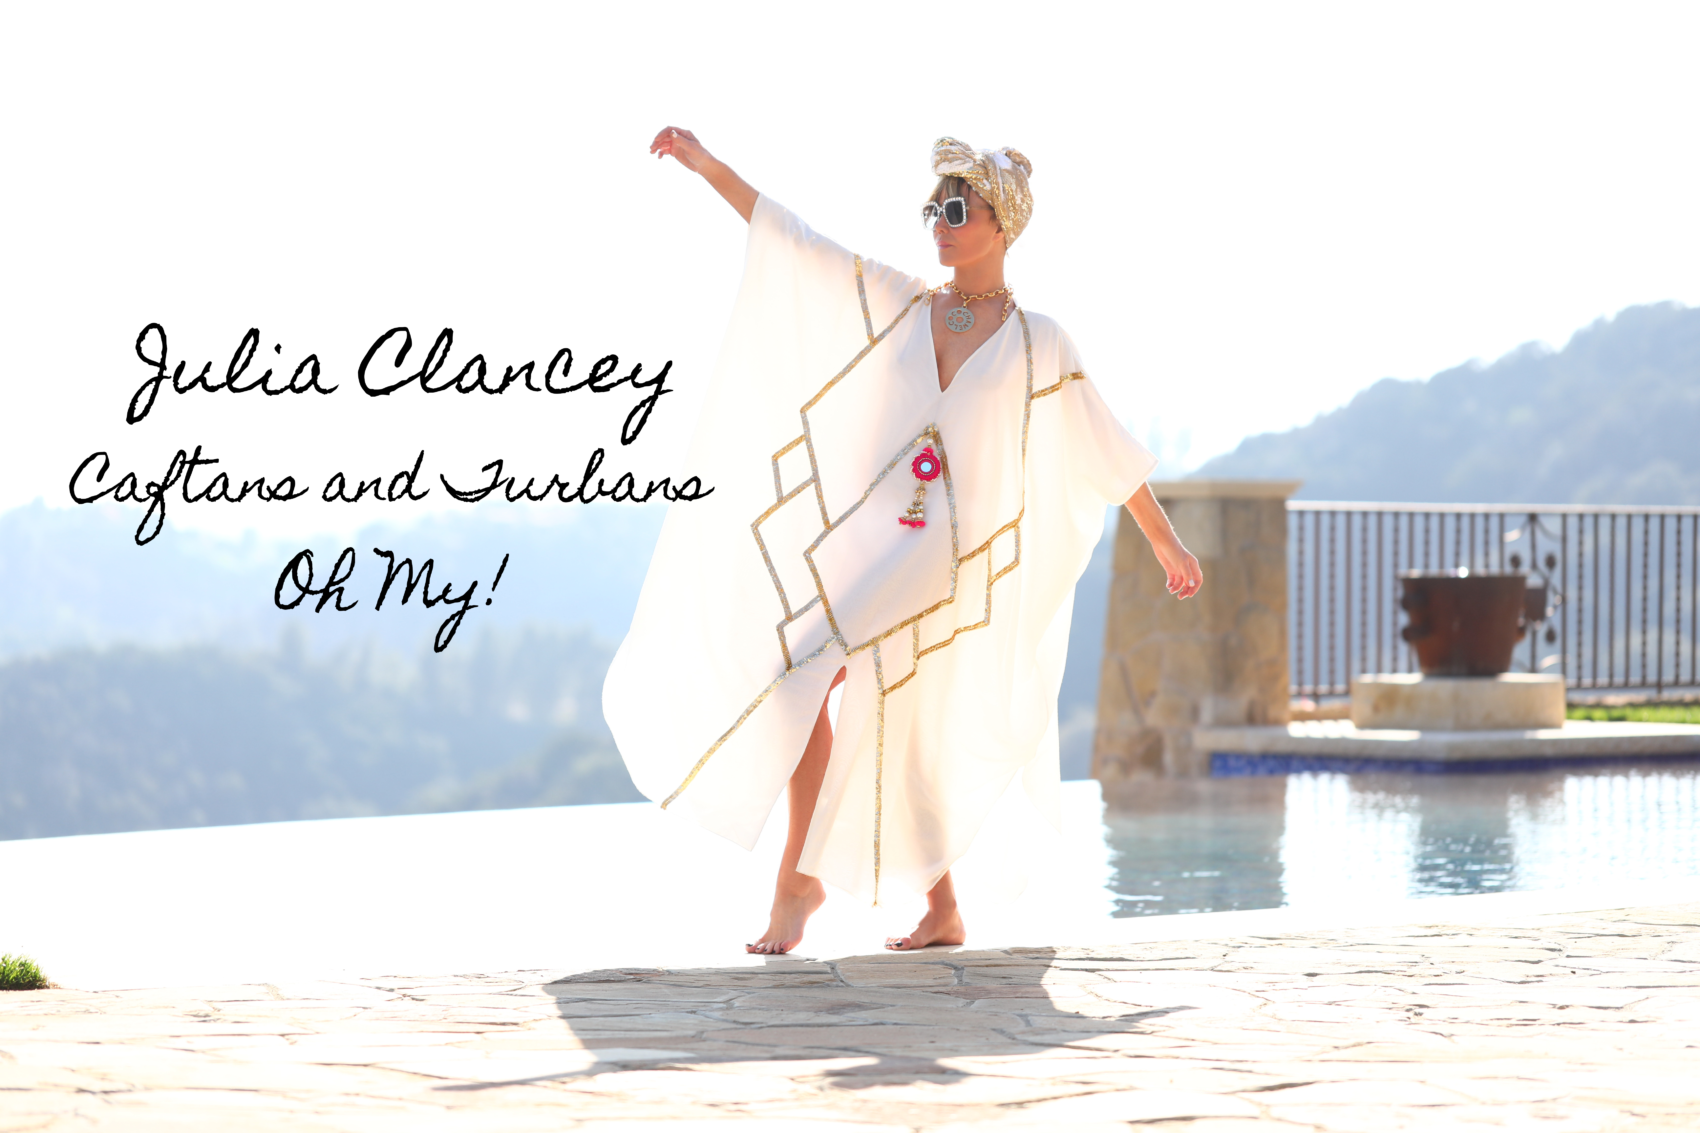 Laura dunn in Julia clanky white caftan and gold and white sequin turban